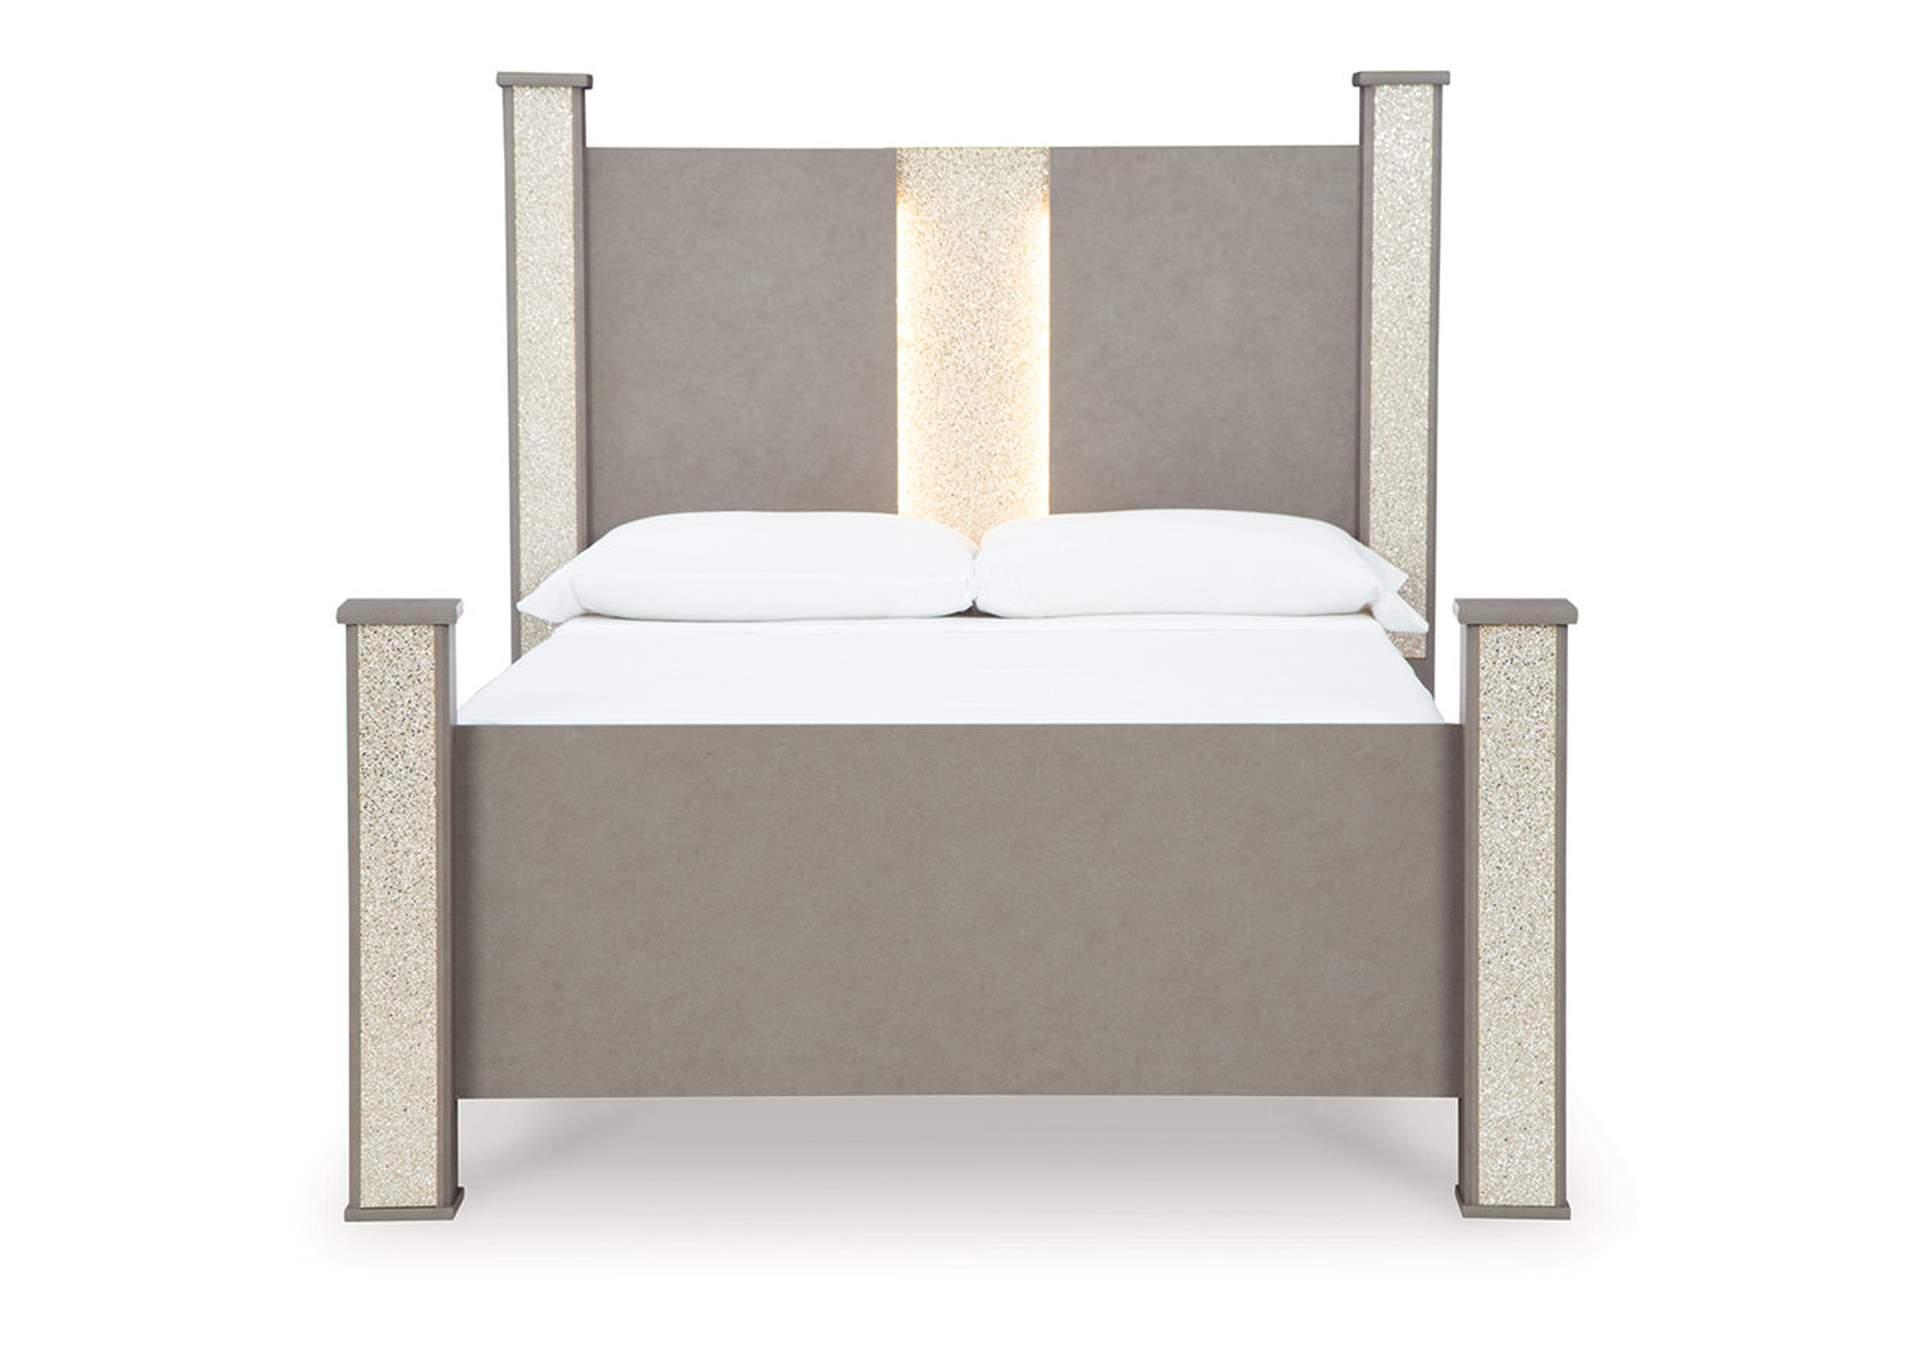 Surancha Queen Poster Bed, Dresser, Mirror and 2 Nightstands,Signature Design By Ashley